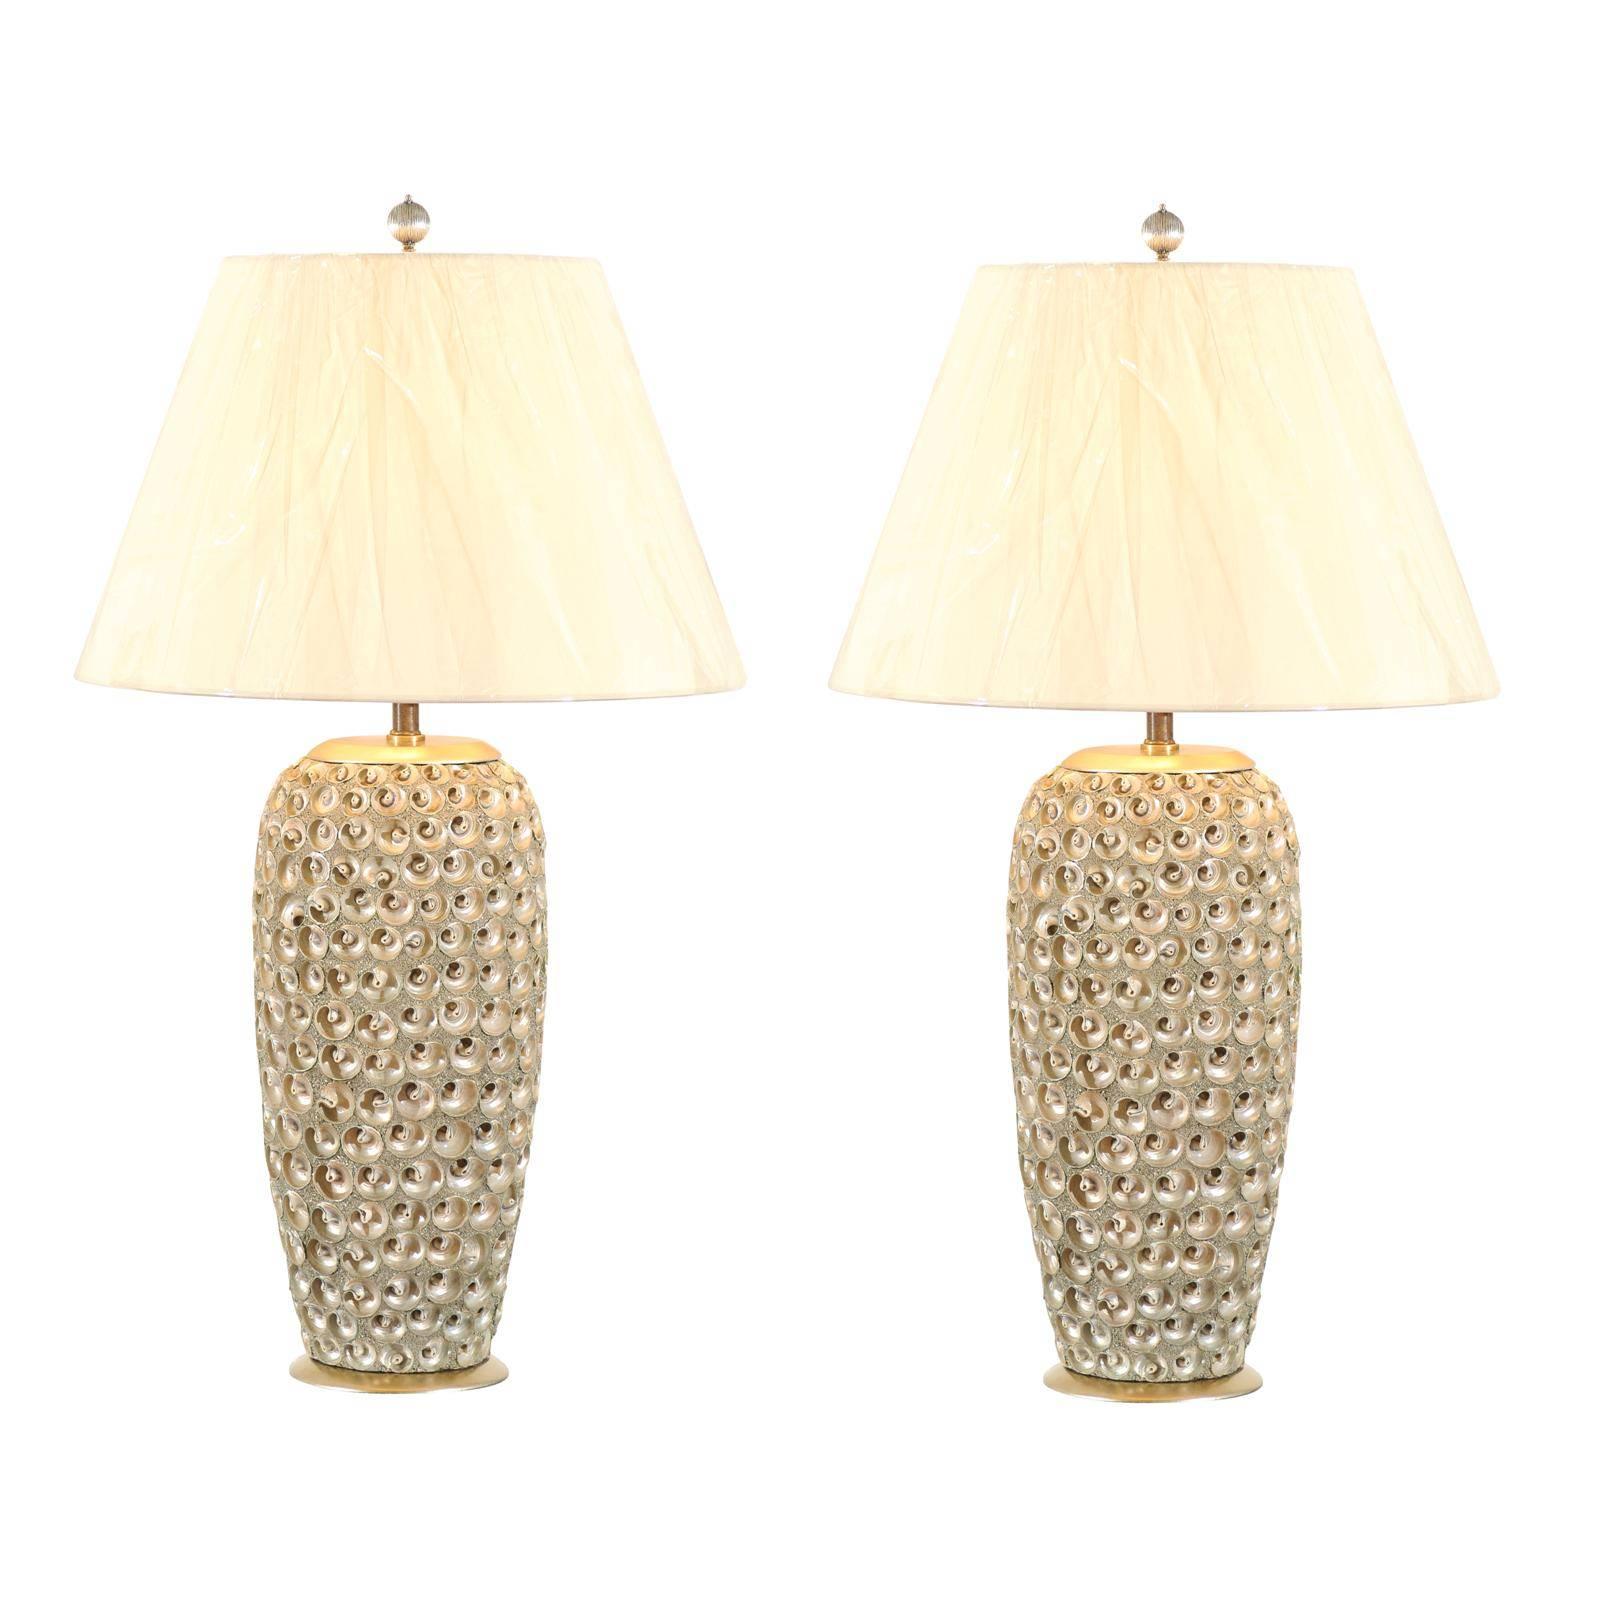 Pair of Modern Large-Scale Shell Lamps with Lucite and Silver Leaf Accents